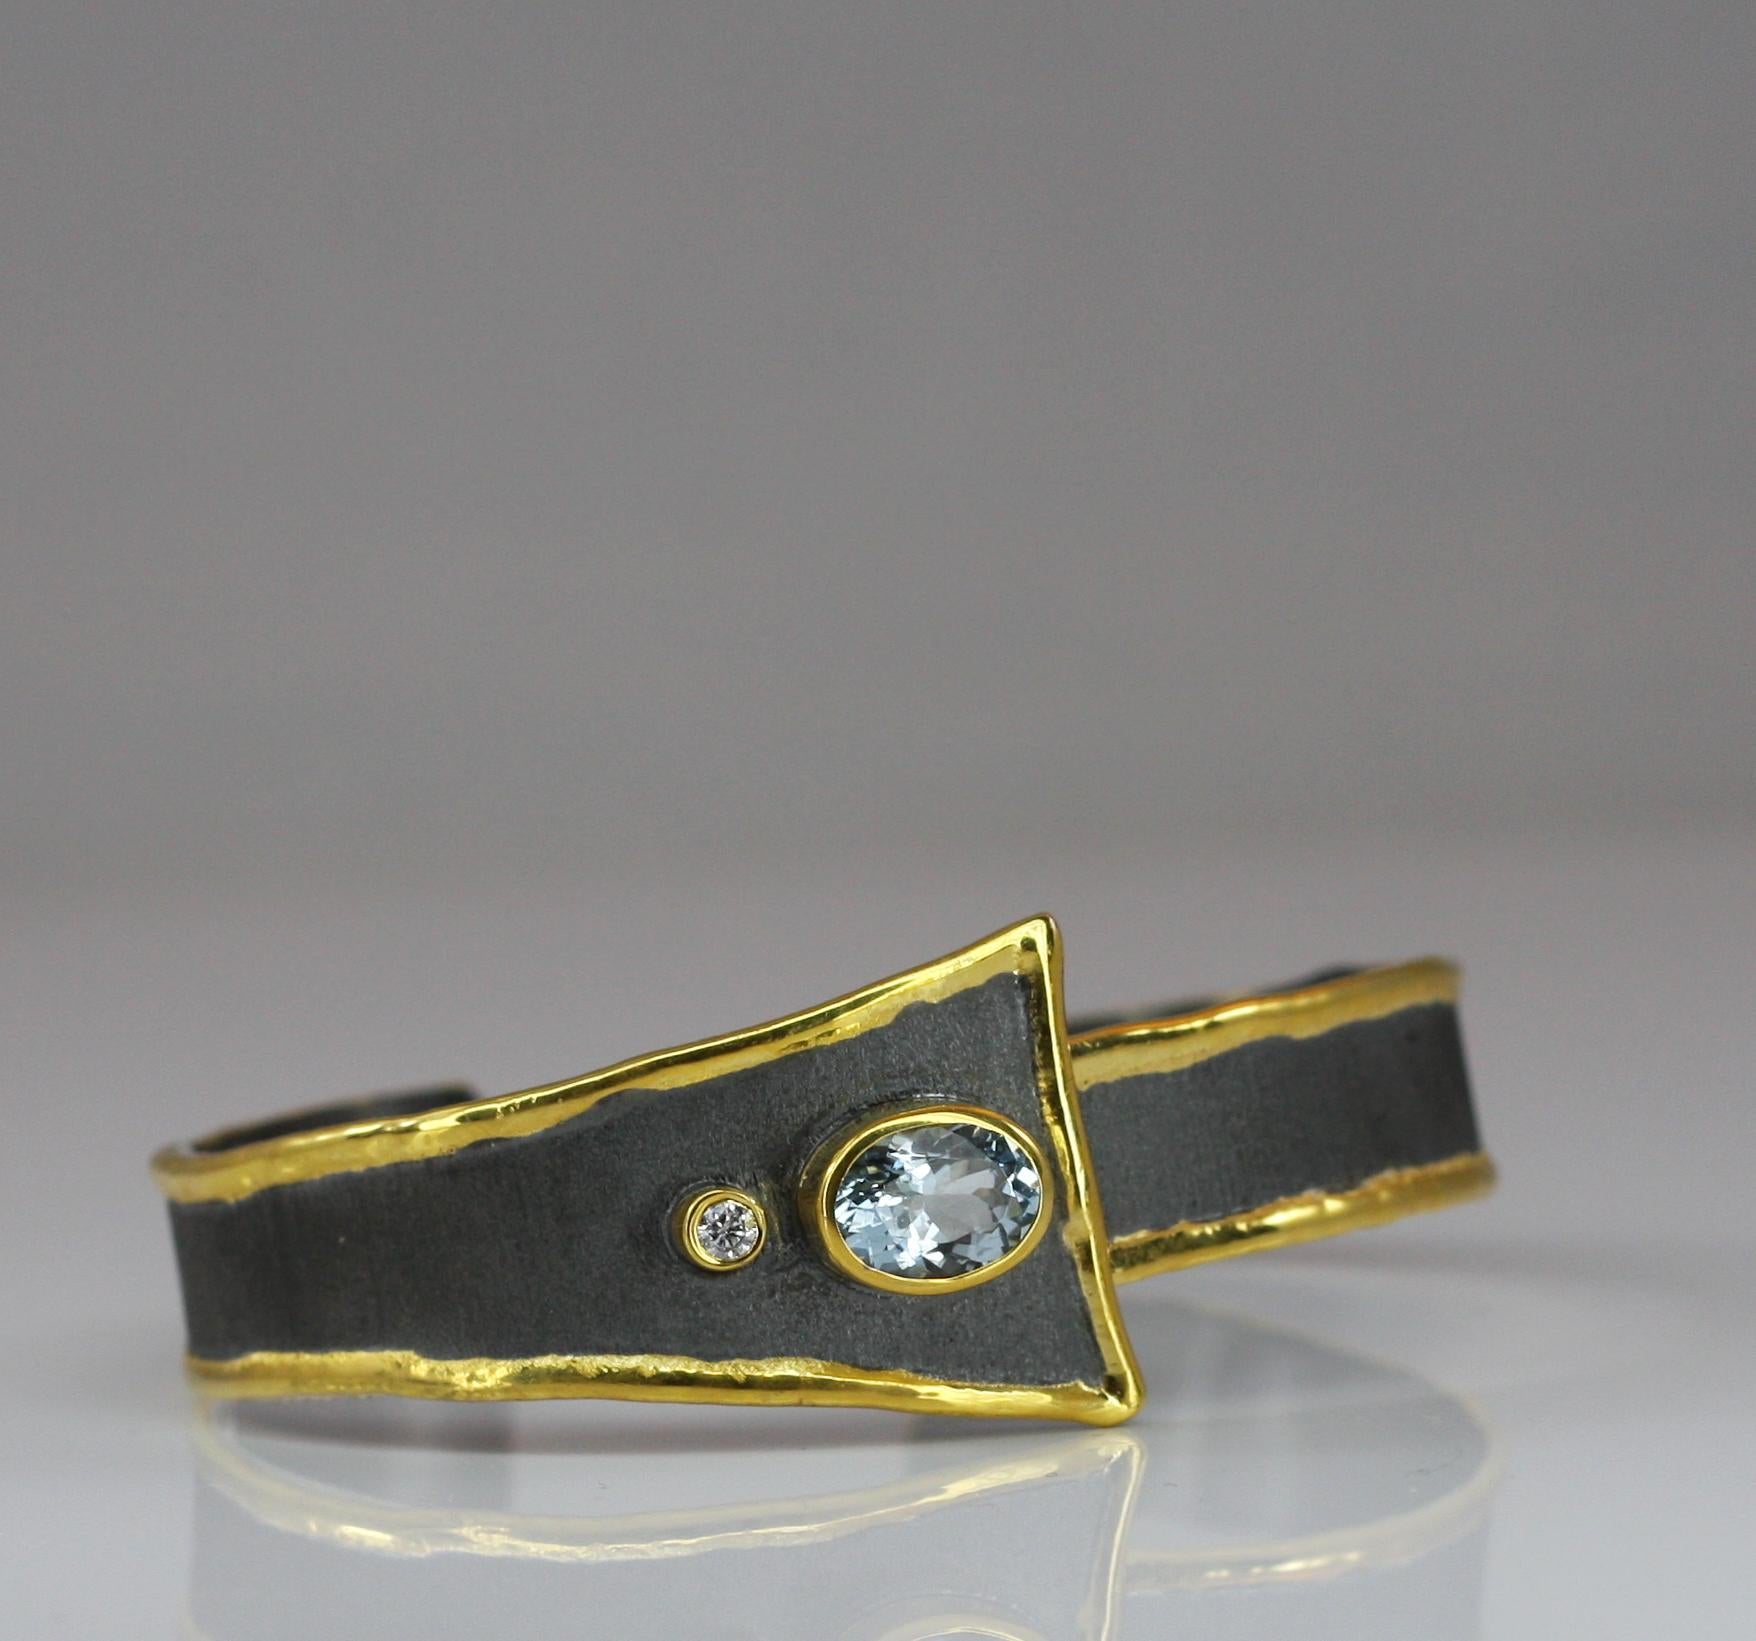 Yianni Creations is presenting geometry inspired bracelet from Eclyps Collection. It is a 100% handmade artisan jewel crafted from fine silver 950 purity plated with Black Rhodium on the background. The liquid edge is decorated by 24 Karat Yellow